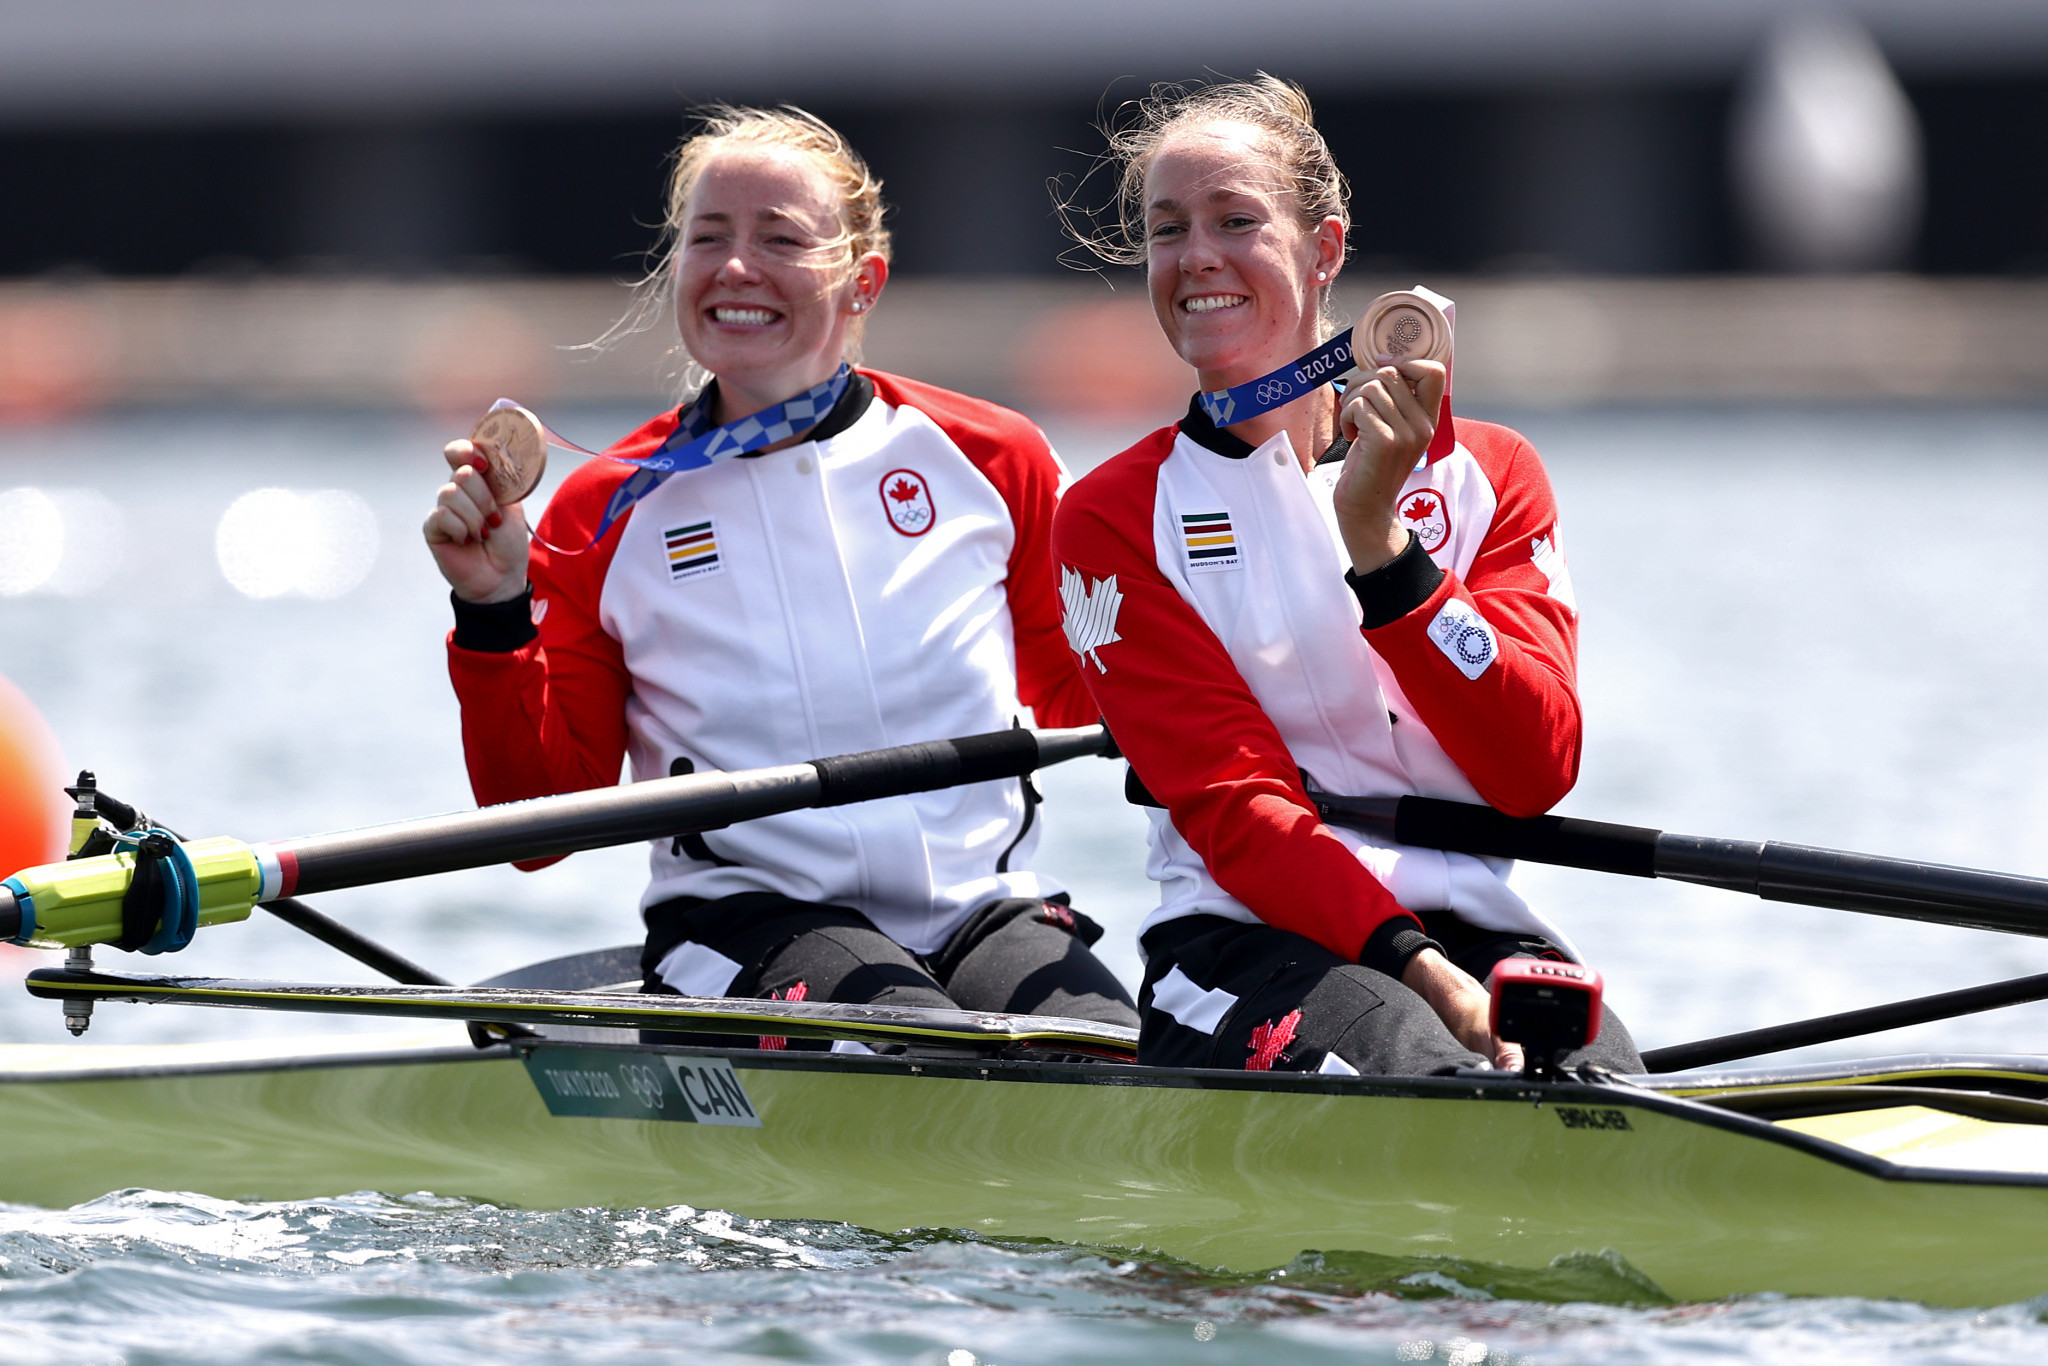 Caileigh Filmer, left, credited the support of LifeWorks for helping her win an Olympic bronze medal in the women's coxless pairs at Tokyo 2020 ©Getty Images